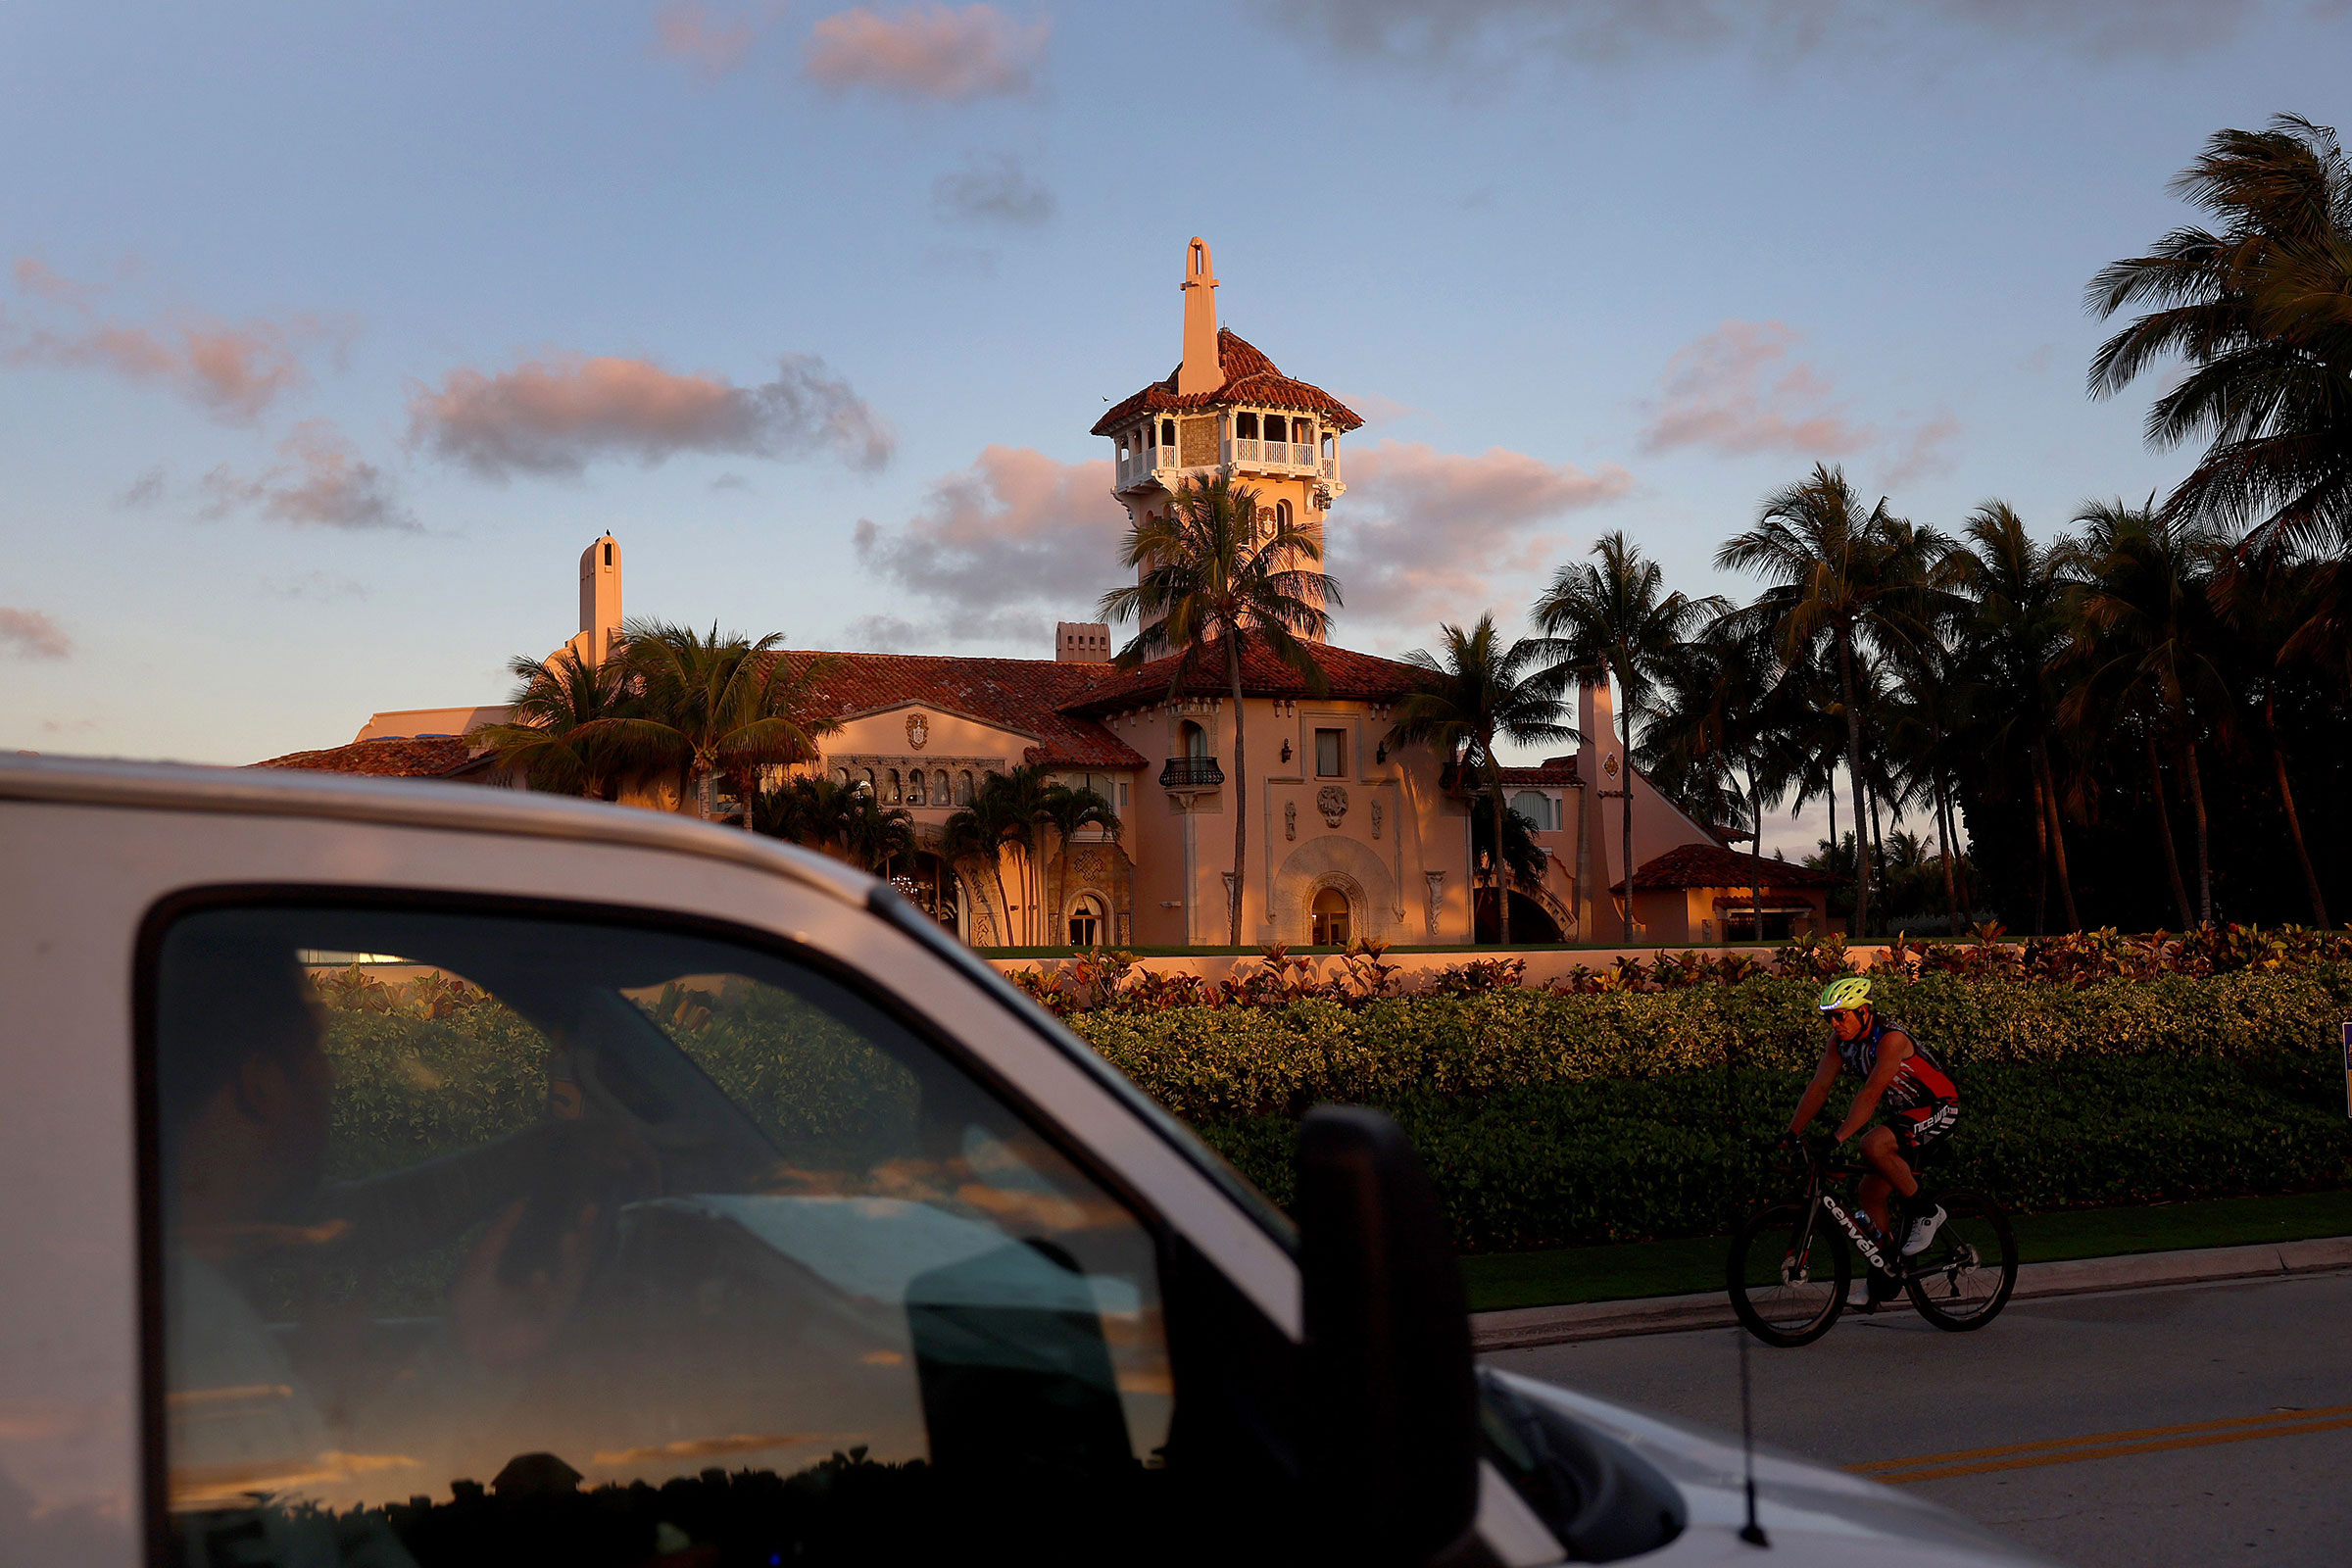 The exterior of former President Donald Trump's Mar-a-Lago home is seen on March 23, in Palm Beach, Florida.